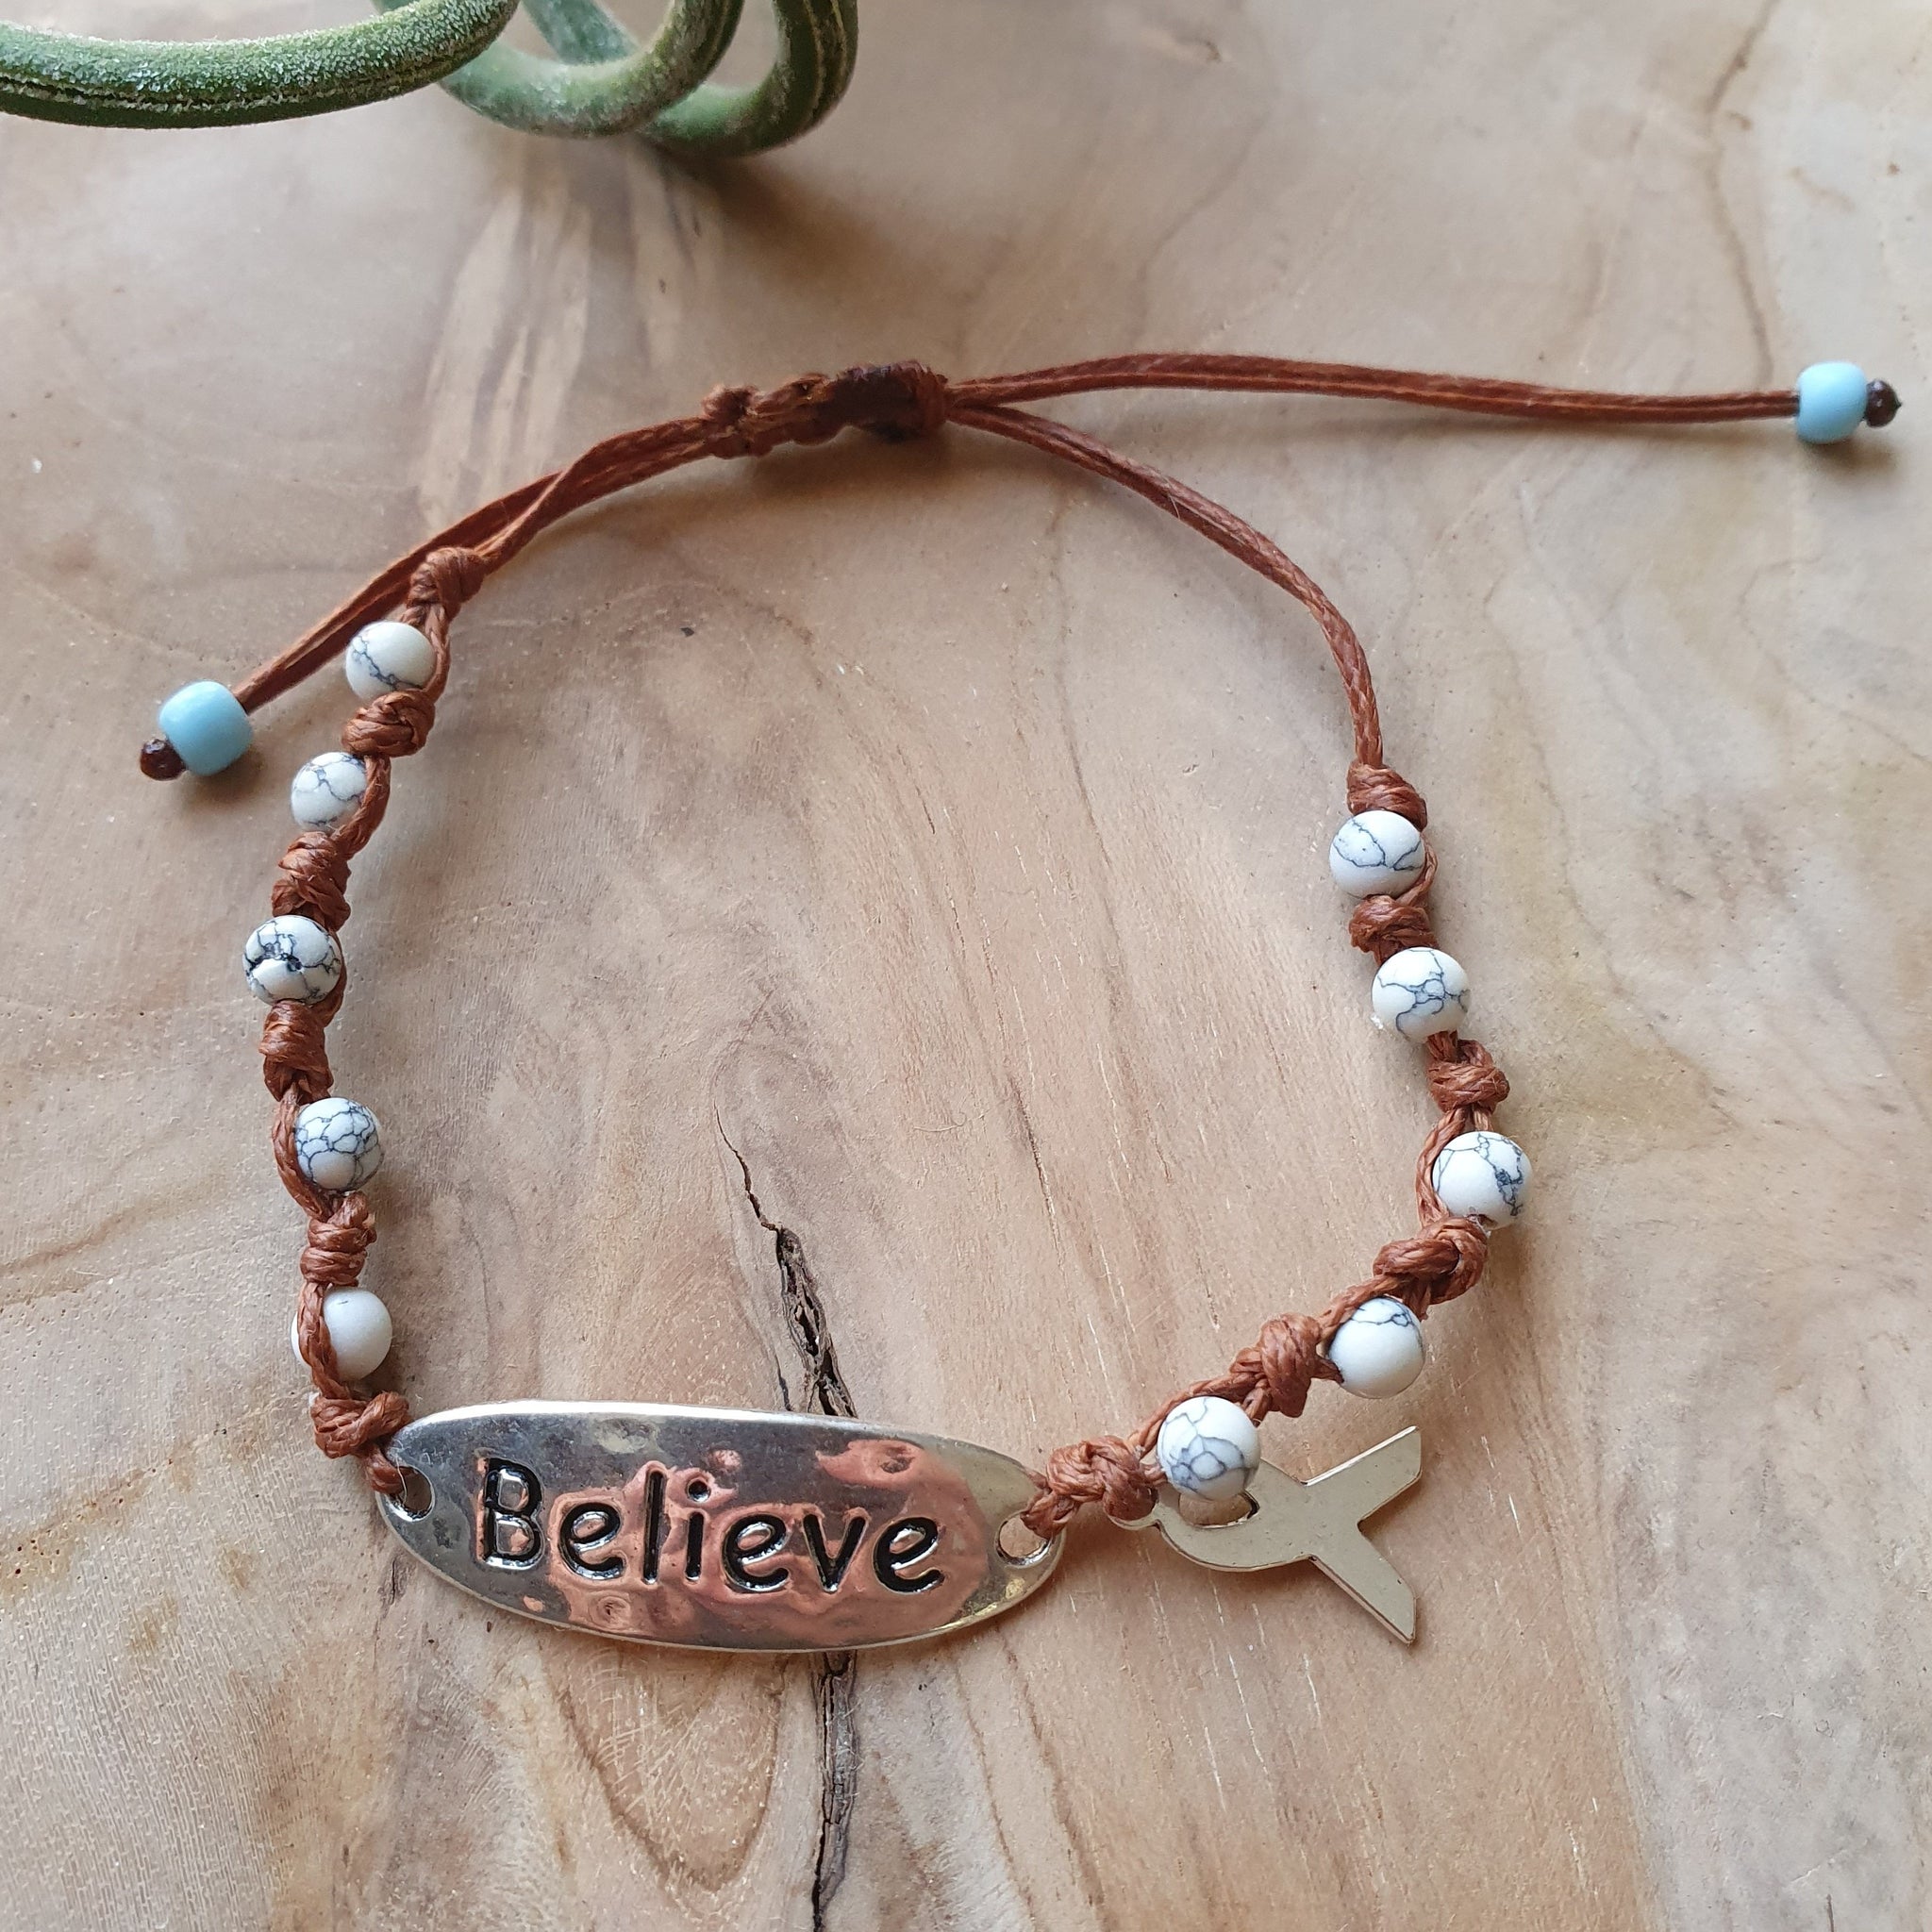 Believe bracelet with beige stones and cancer ribbon